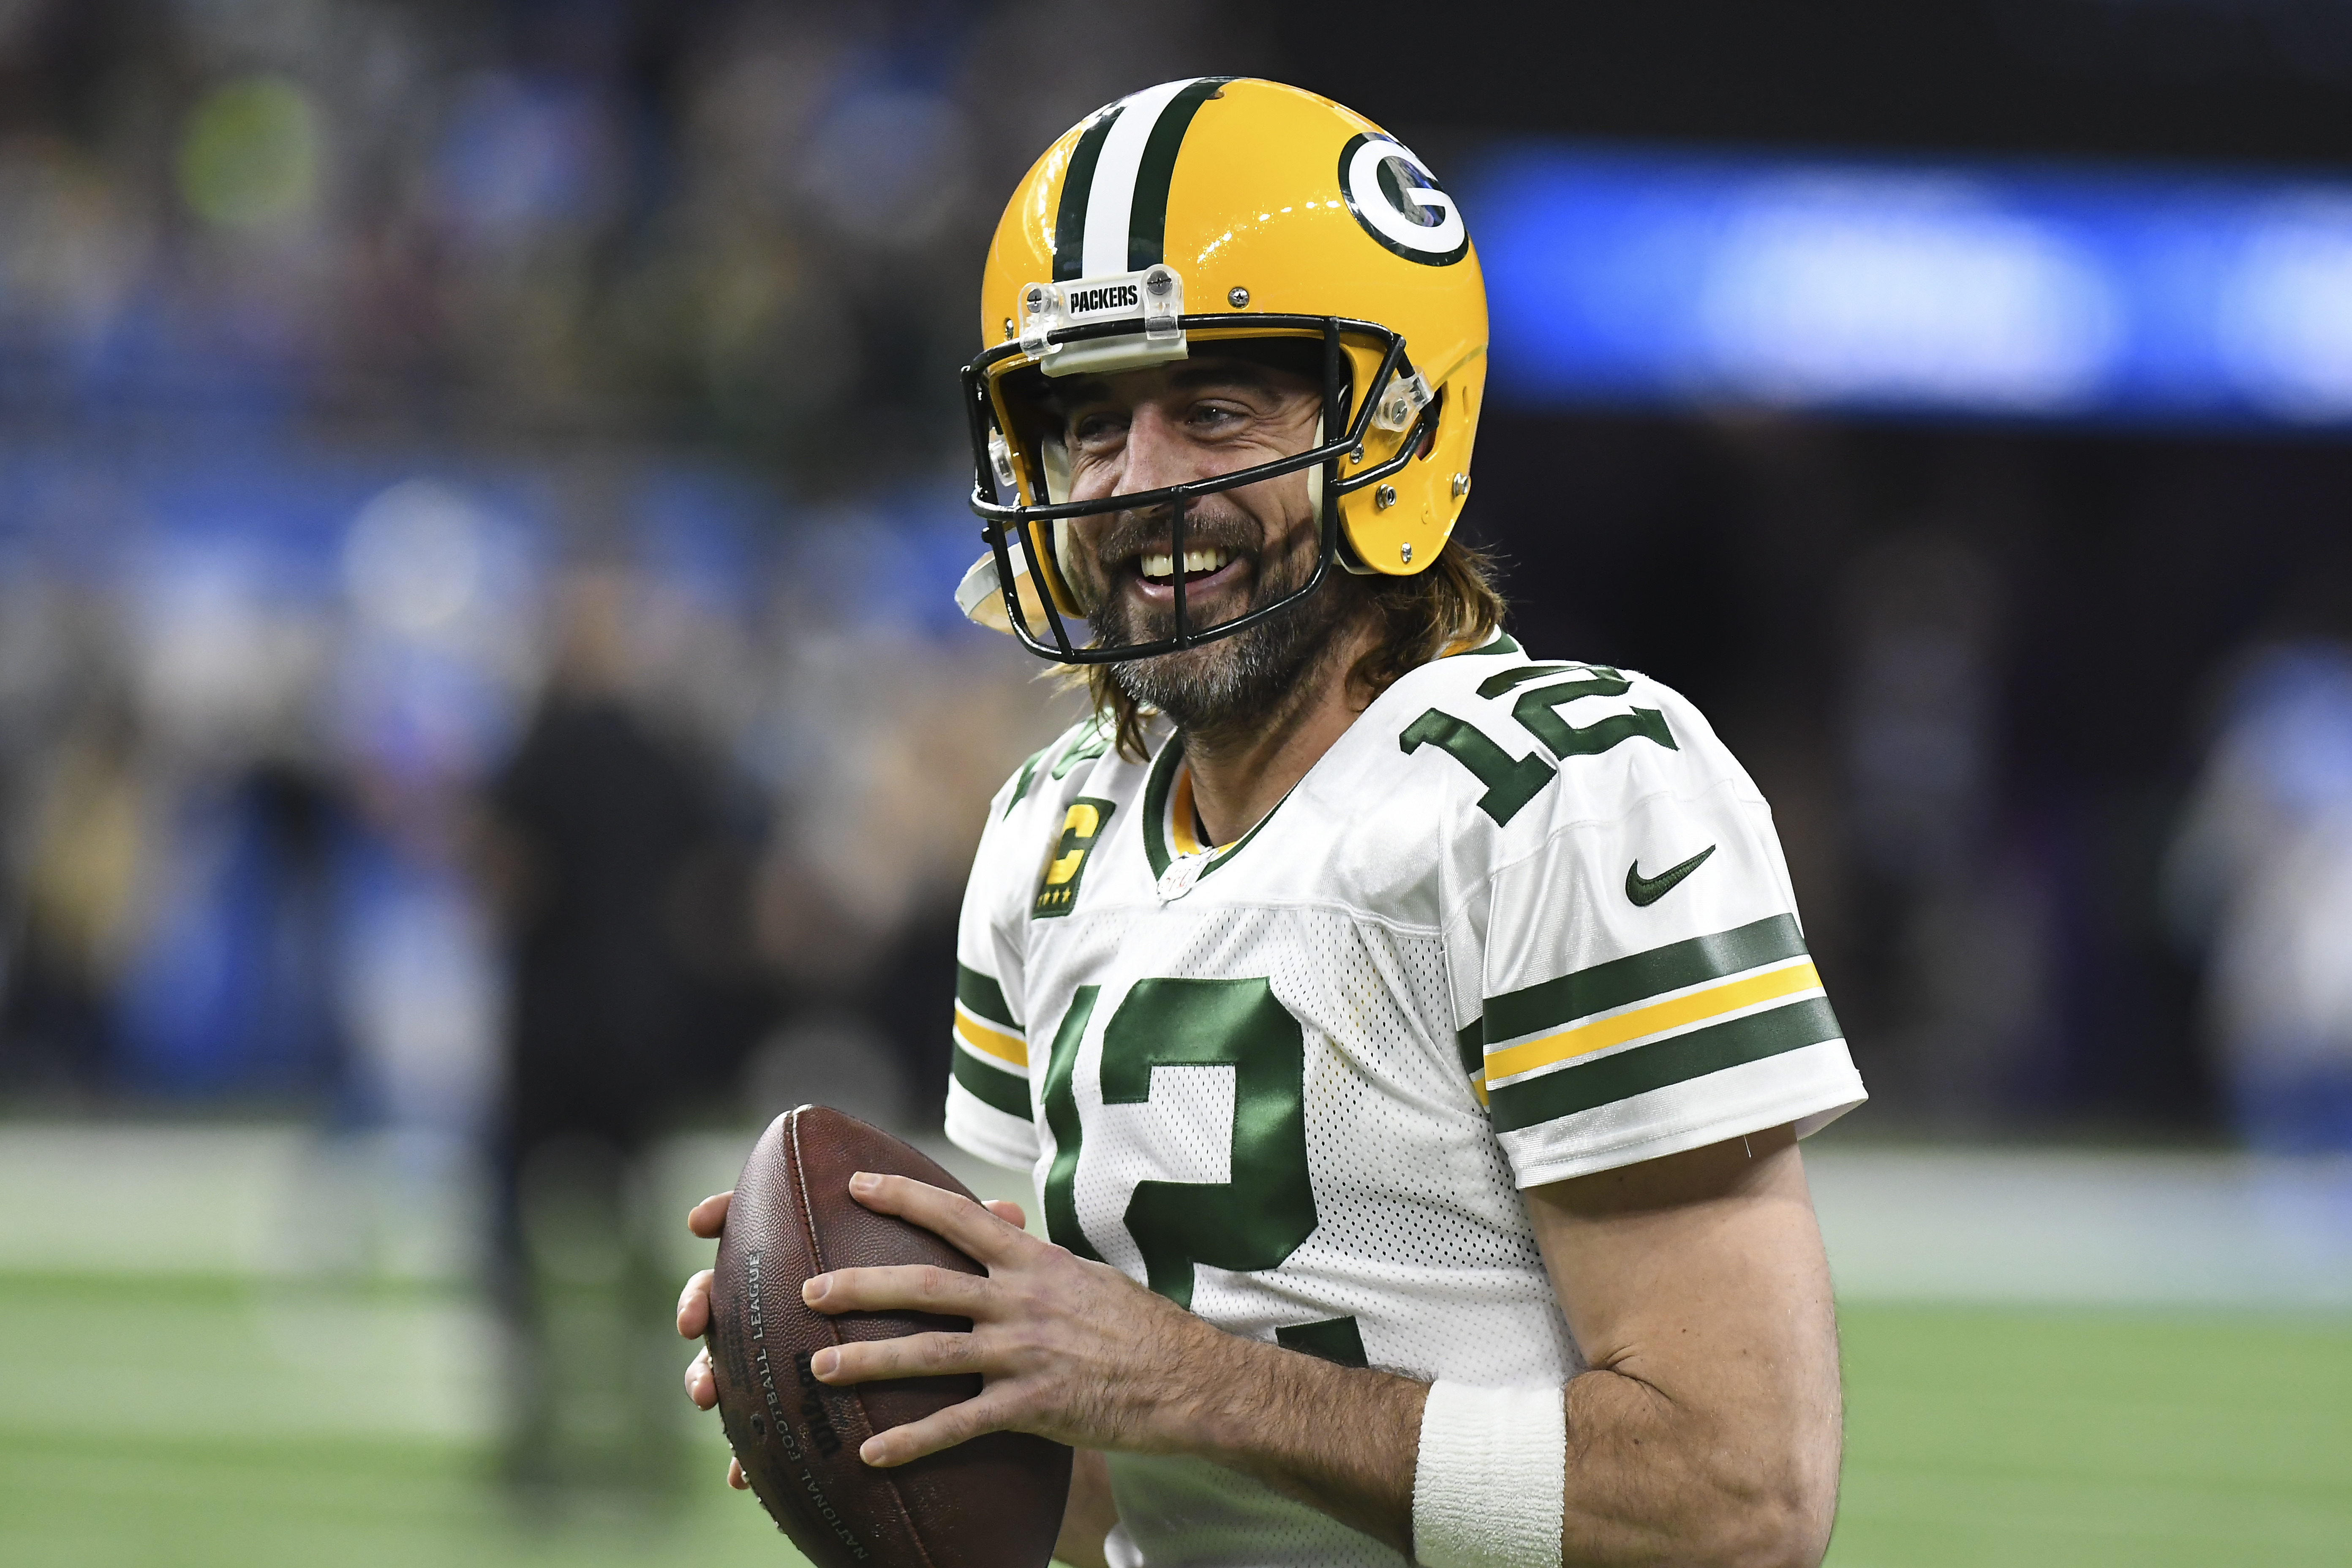 Aaron Rodgers' injury deepens Jets' unparalleled run of misery